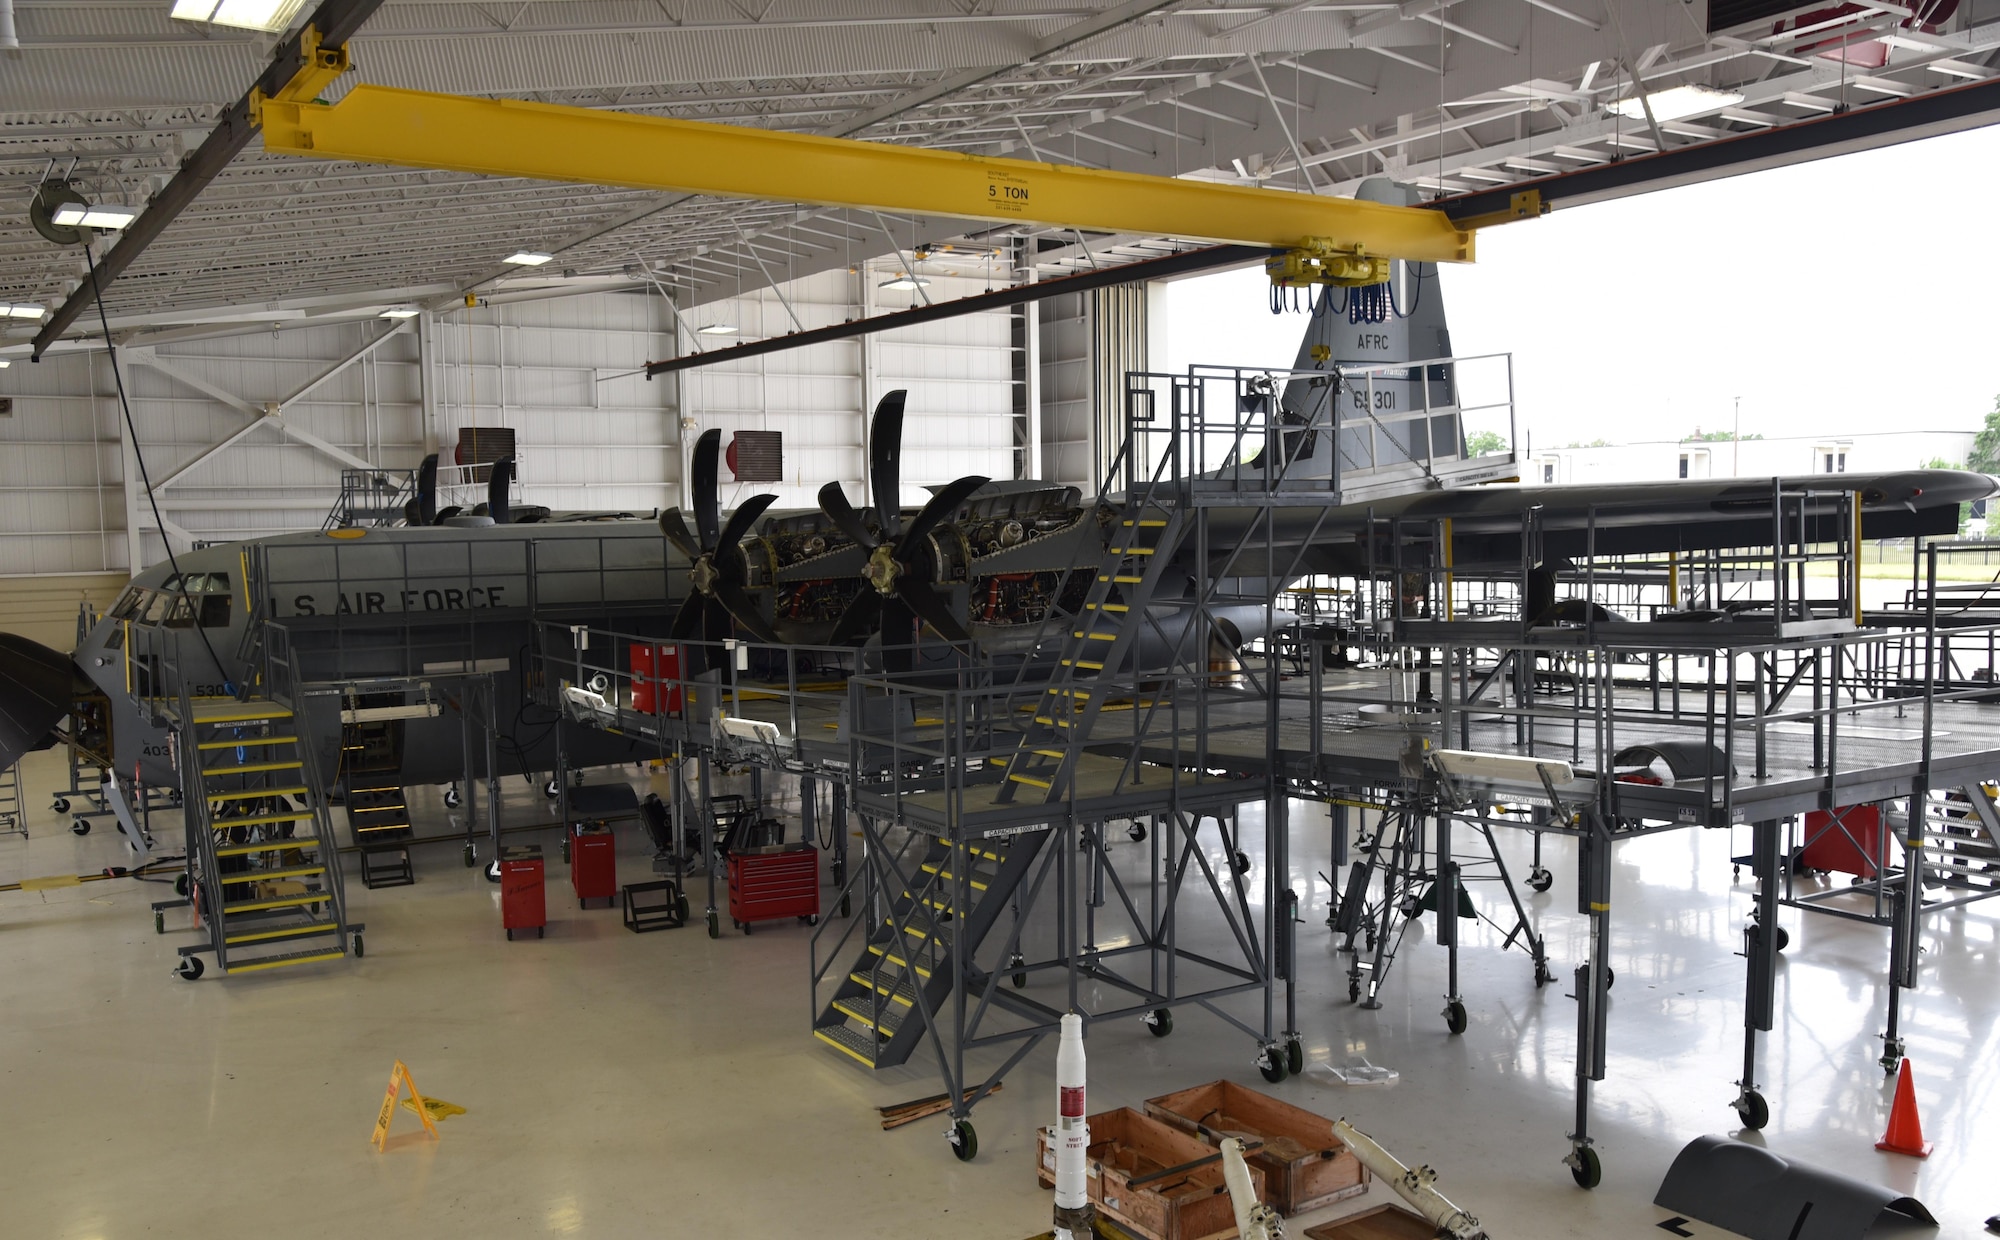 The Air Force Reserve's 403rd Maintenance Squadron Isochronal Inspection Dock at Keesler Air Force Base, Mississippi, received new maintenance platforms, commonly referred to as “stands,” April 14, 2016. The previous stands became outdated, not meeting fall protection limits, and they were not configured all the way around the aircraft. The new stands are placed completely around the aircraft to include the nose and tail sections, provide more working area and access to power and lighting. (U.S. Air Force photo/Maj. Marnee A.C. Losurdo)